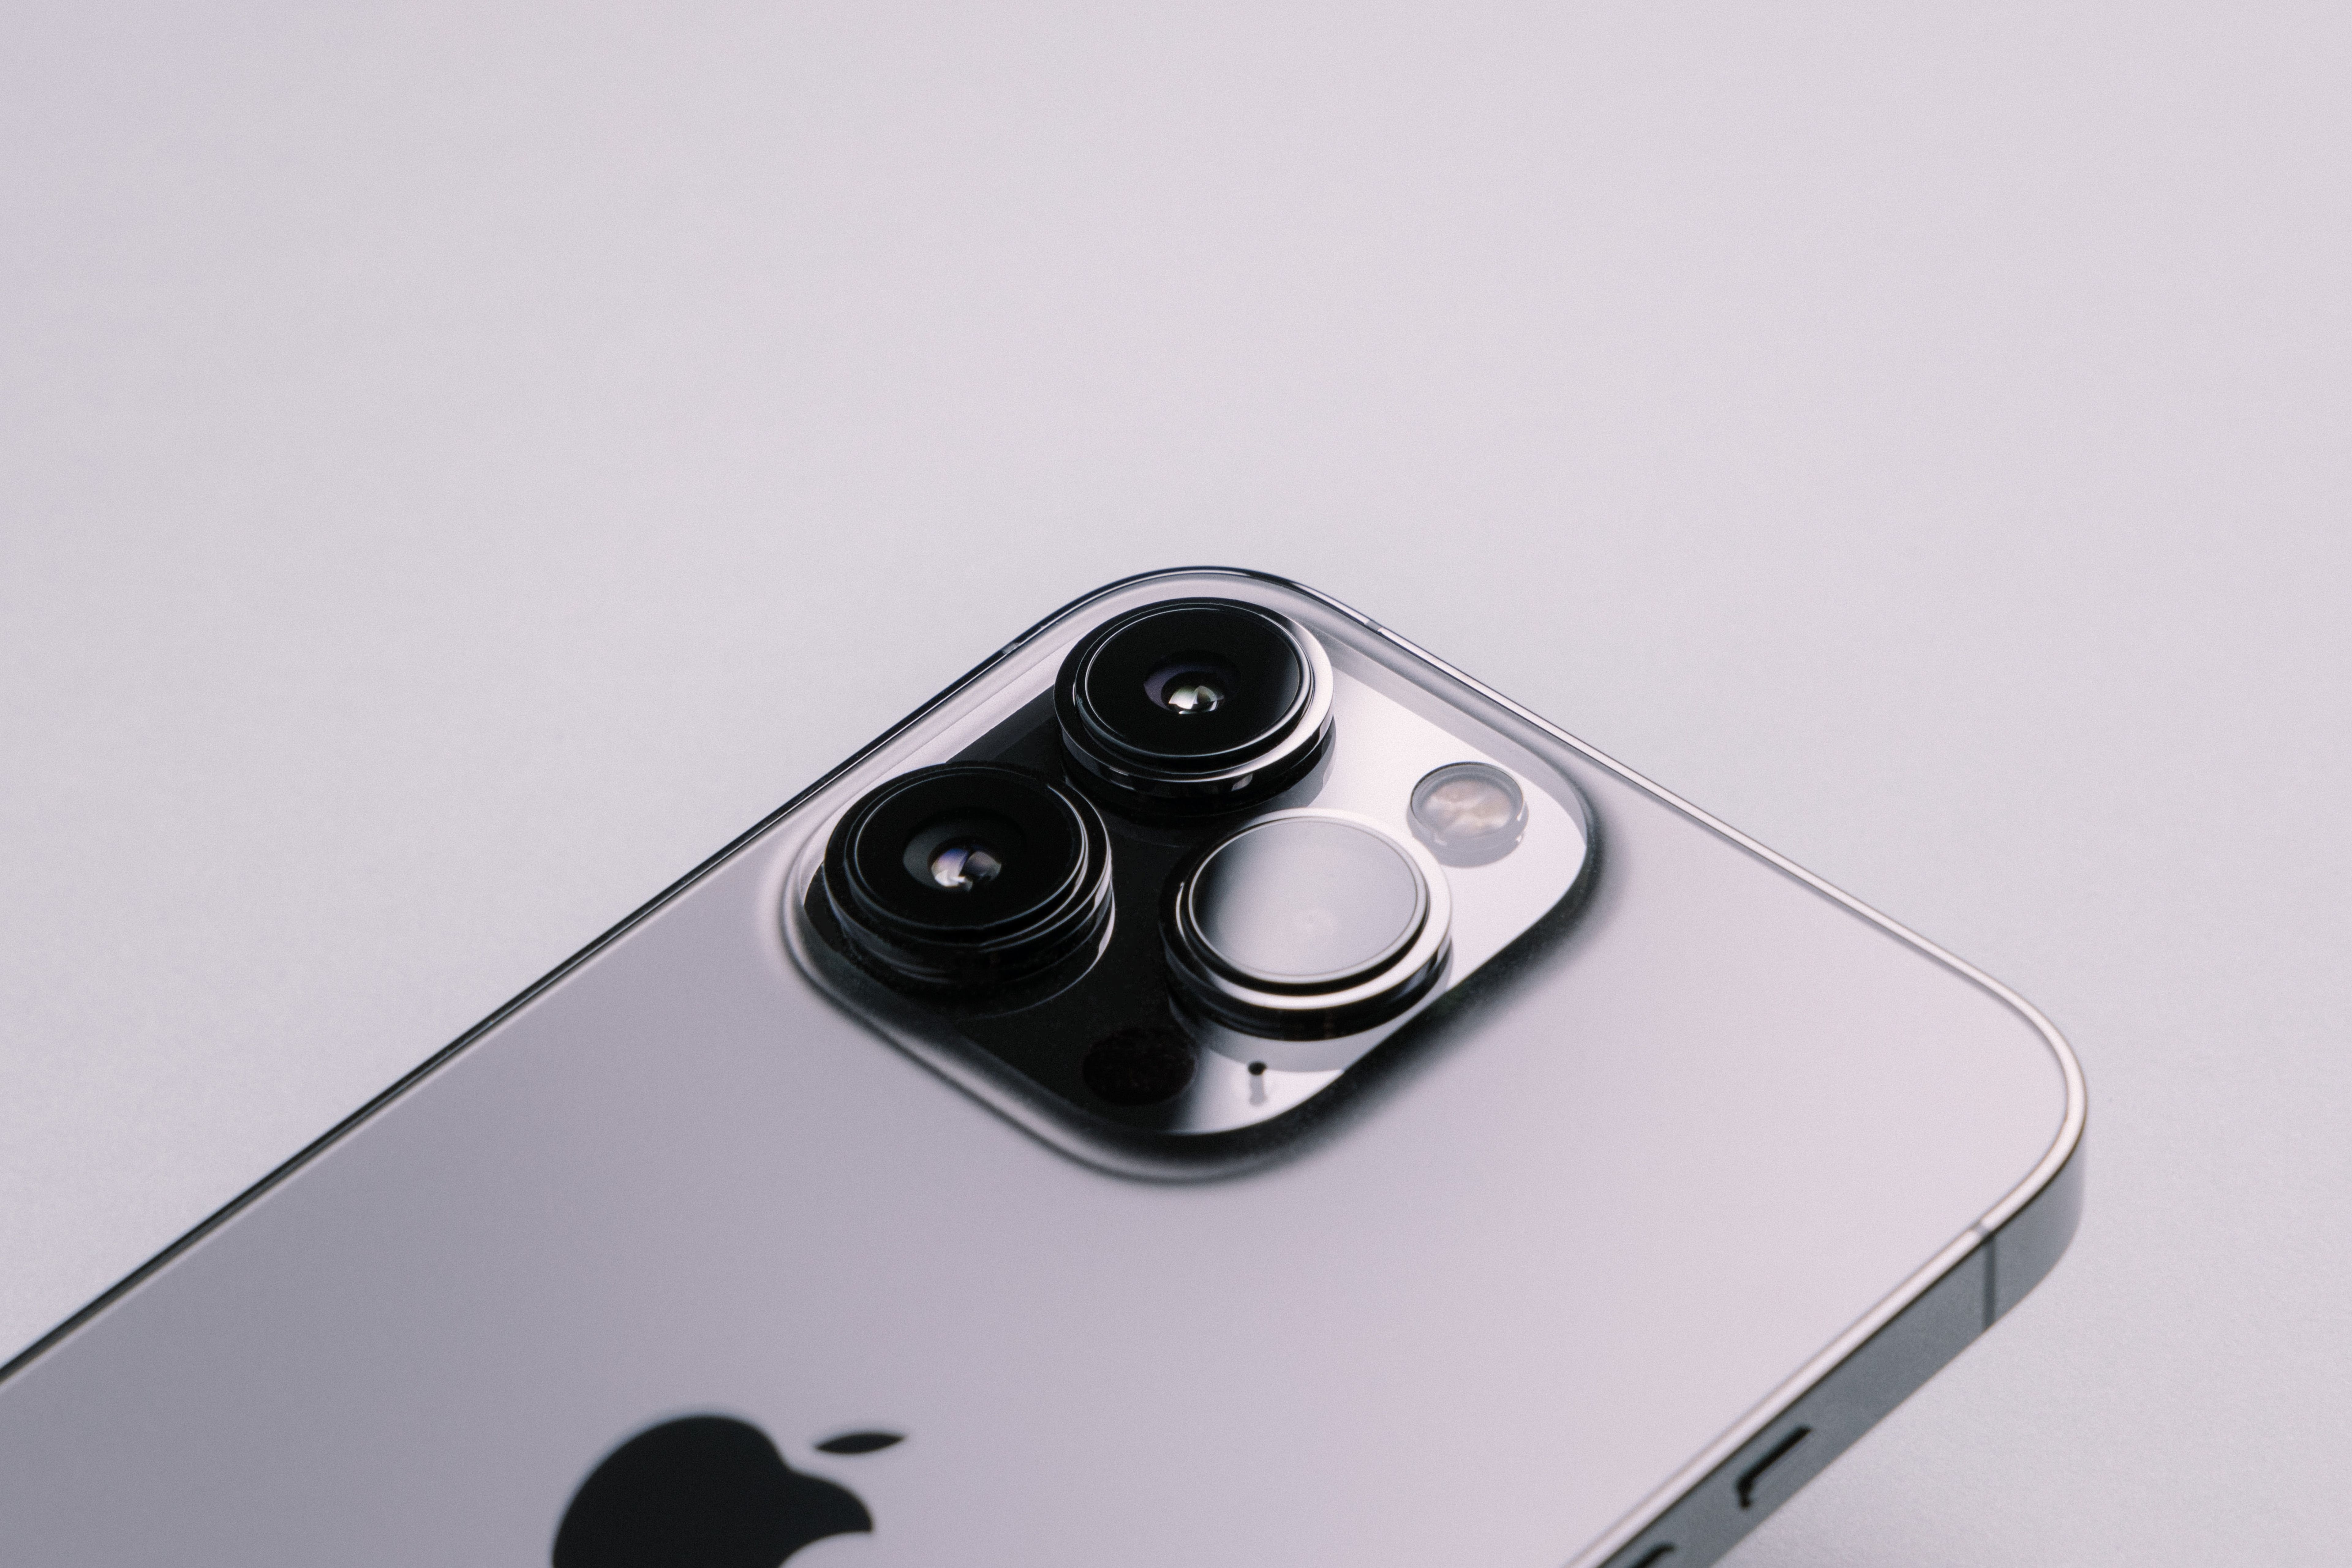 iPhone Discount? Apple Rare Move Means Nearly $100 For China Buyers With An Alibaba Connect